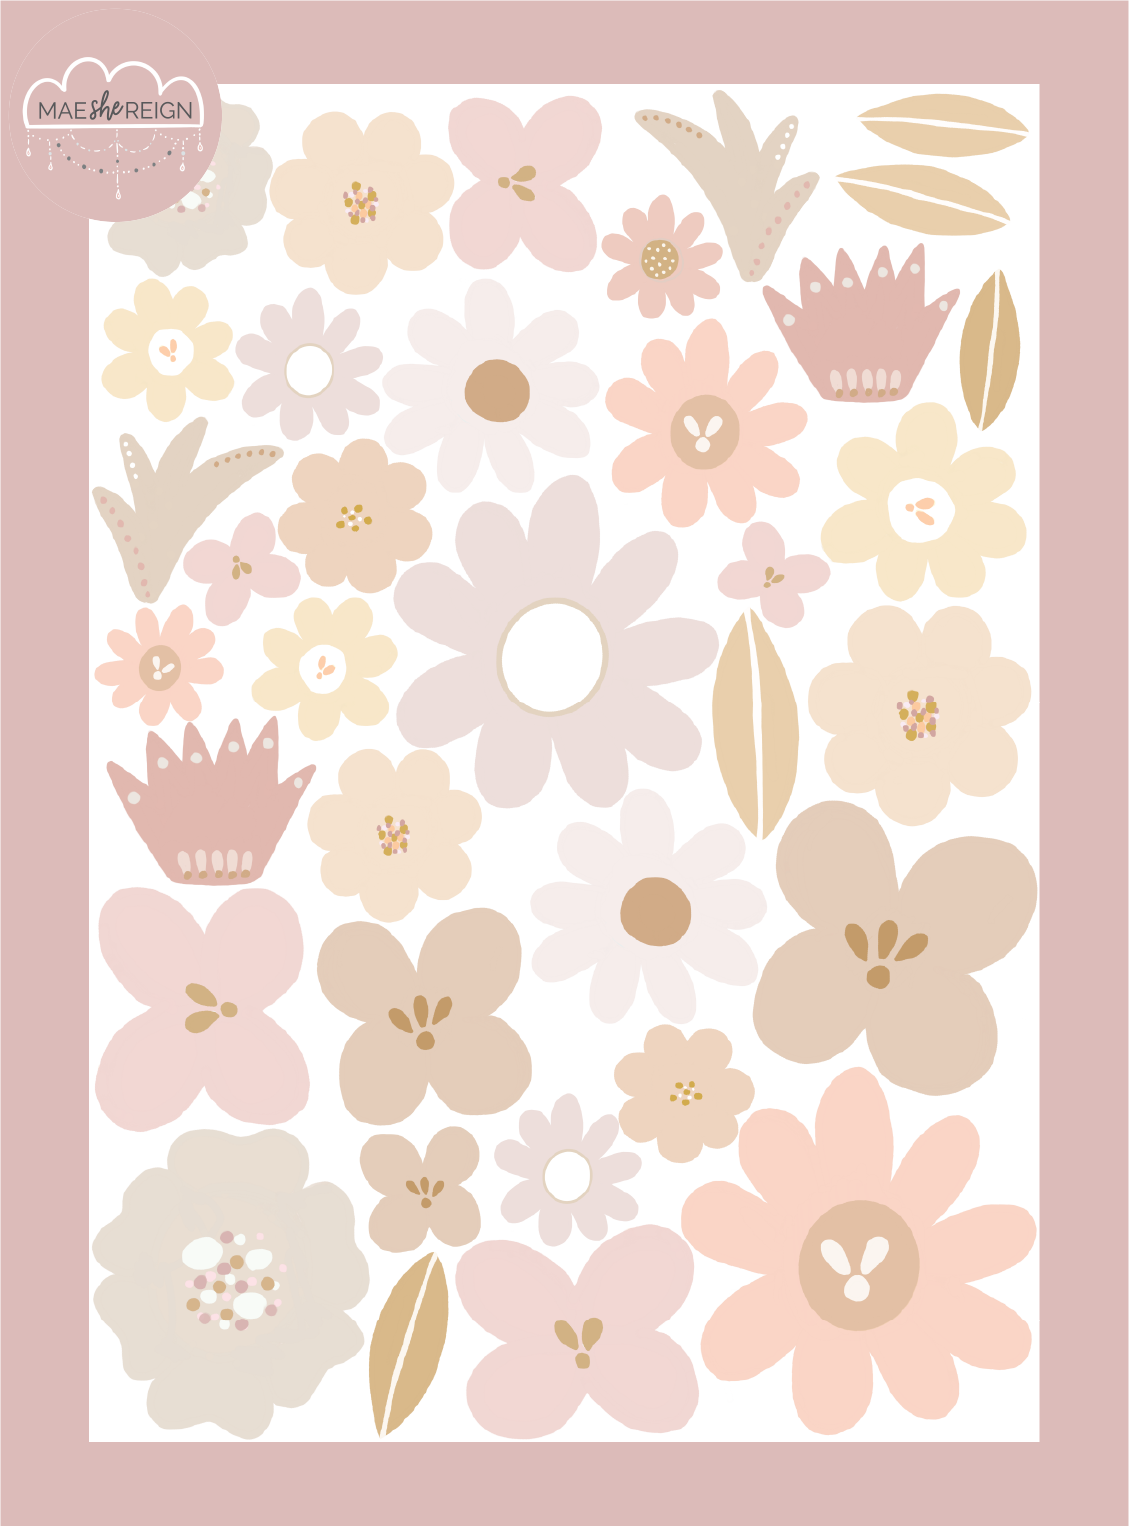 Days With Wildflowers [Blush] Wall Decals - Mae She Reign - Creative Studio